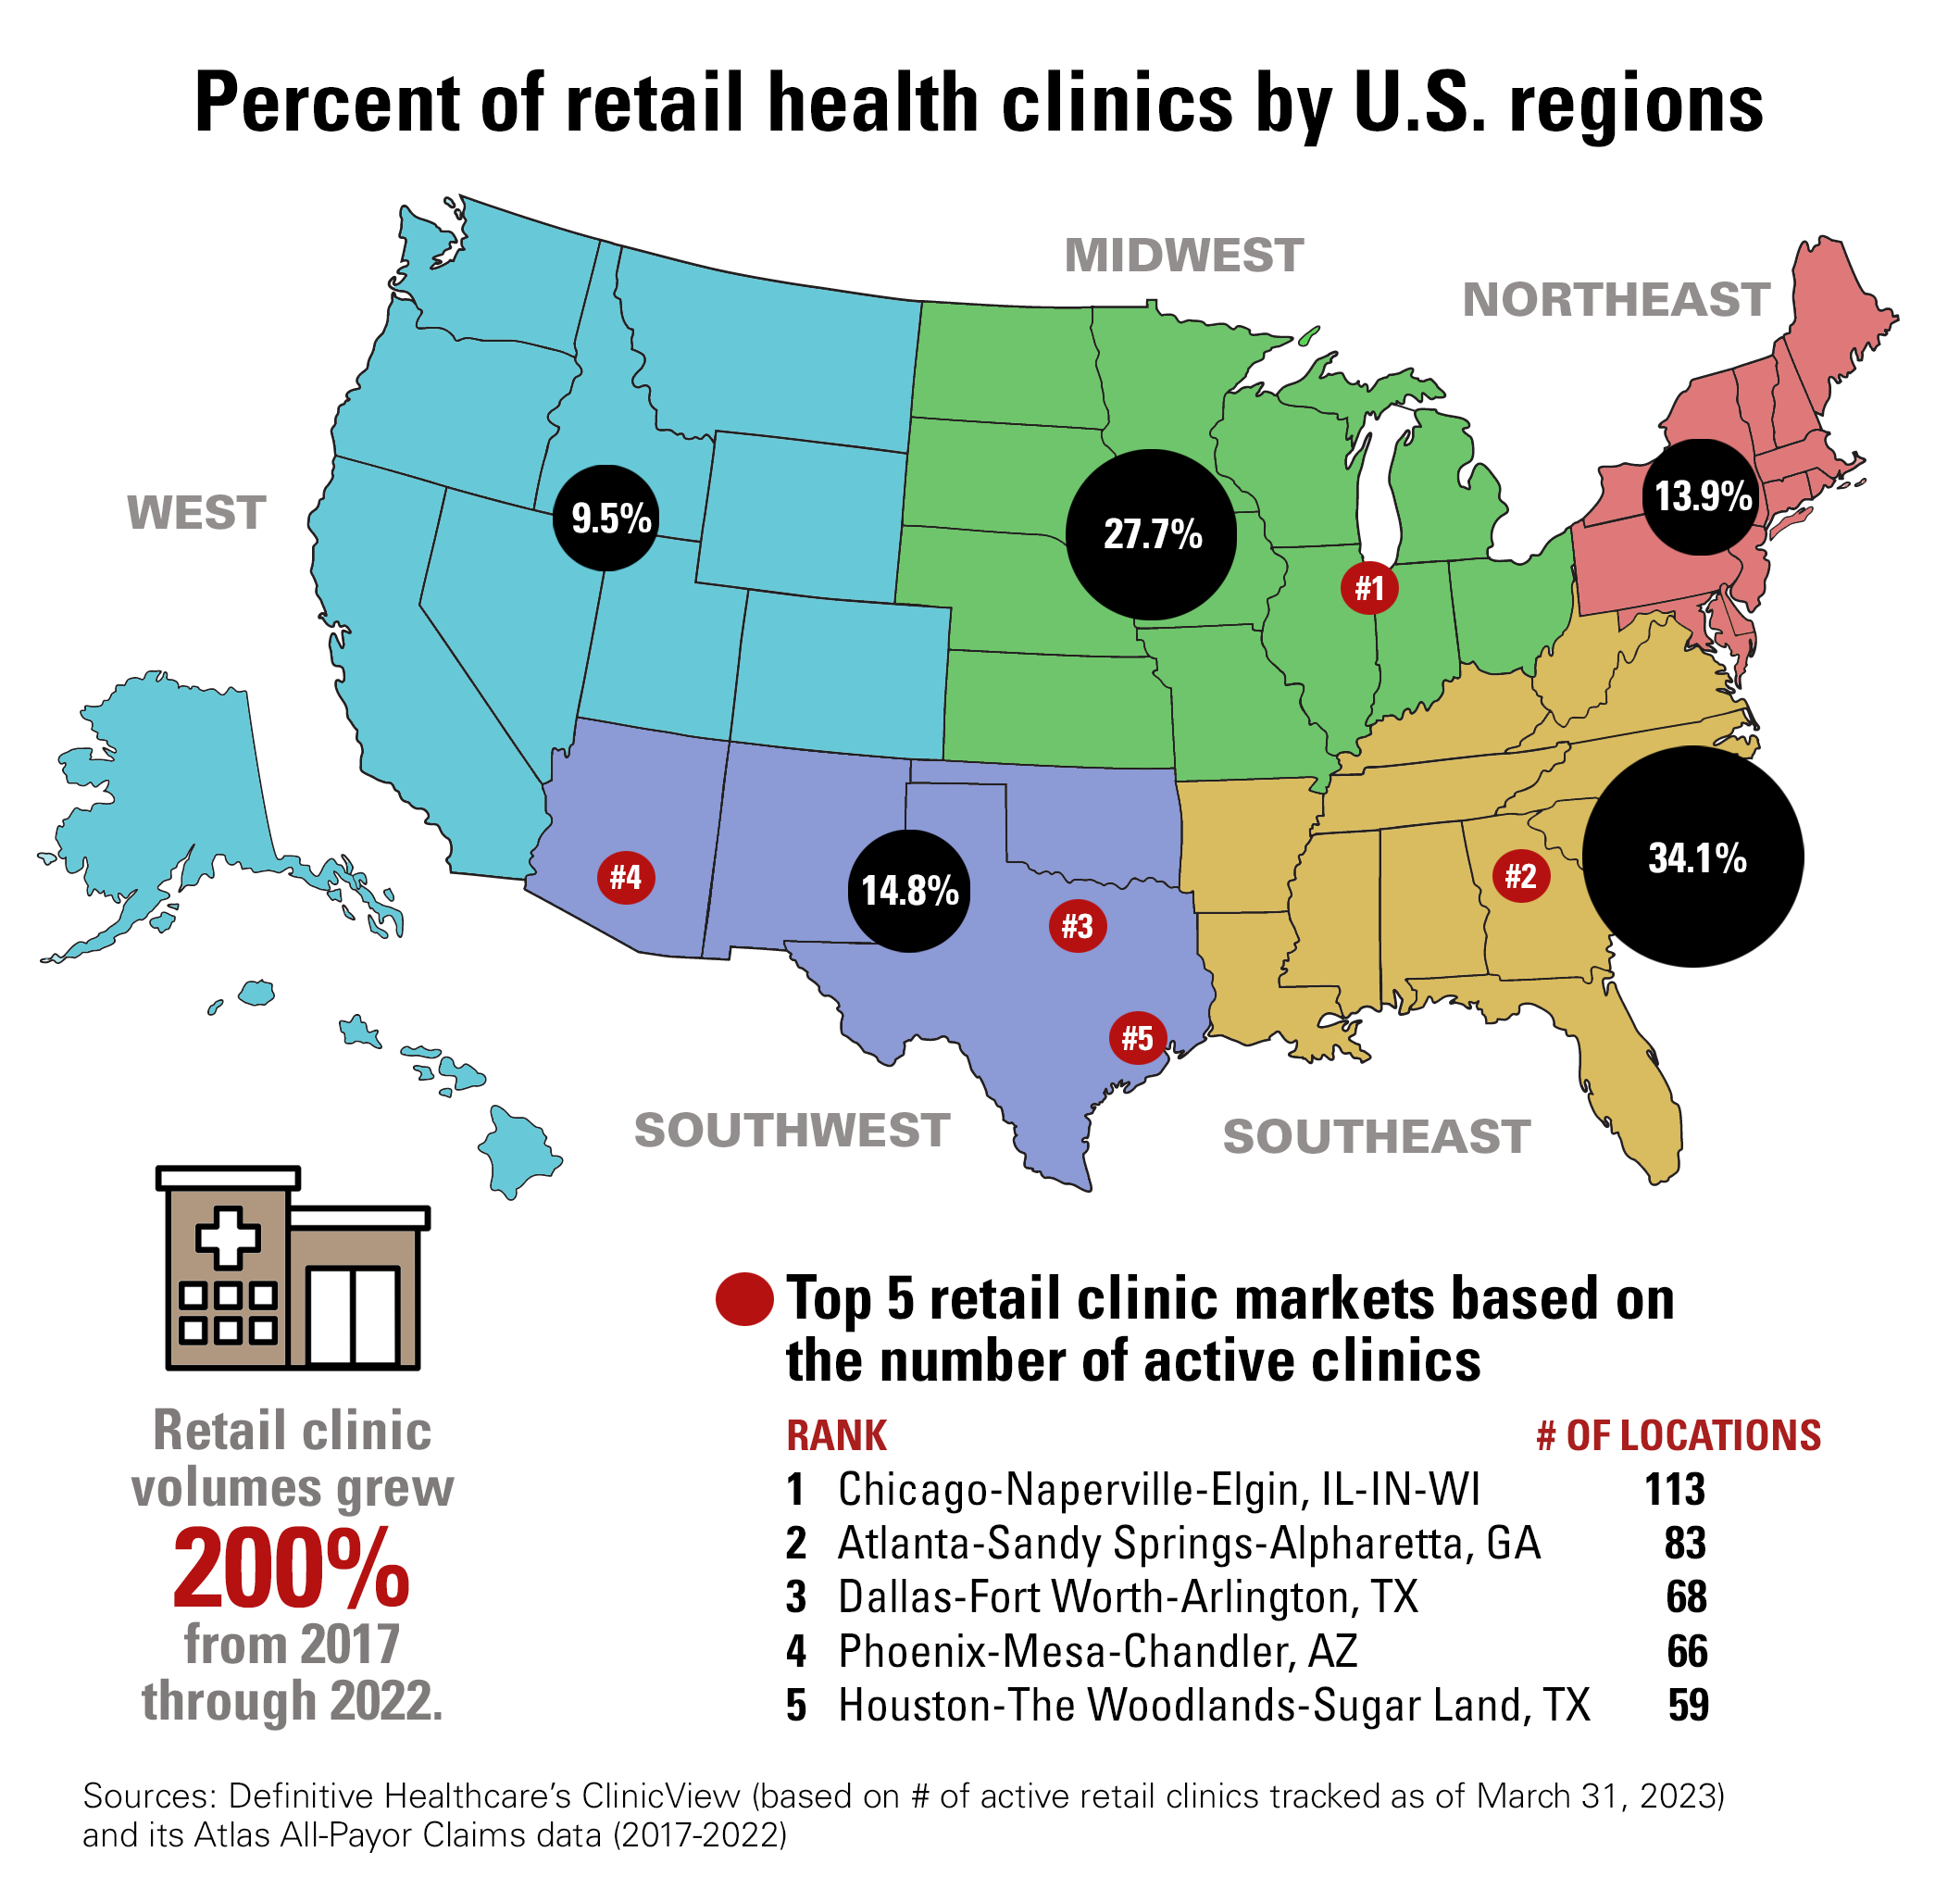 Percent of retail health clinics by U.S. regions. Southeast: 34.1%. Midwest: 27.7%. Southwest: 14.8%. Northeast: 13.9%. West: 9.5%. Retail clinic volumes grew 200% from 2017 through 2022. Top 5 retail clinic markets based on the number of active clinics: 1. Chicago-Naperville-Elgin, IL-IN-WI: 113 locations; 2. Atlanta-Sandy Springs-Alpharetta, GA: 83 locations; 3. Dallas-Fort Worth-Arlington, TX: 68 locations; 4. Phoenix-Mesa-Chandler, AZ: 66 locations; 5. Houston-The Woodlands-Sugar Land, TX: 59 locations. Sources: Definitive Healthcare's ClinicView (based on # of active retail clinics tracked as of March 31, 2023) and its Atlas All-Payor Claims data (2017-2022).